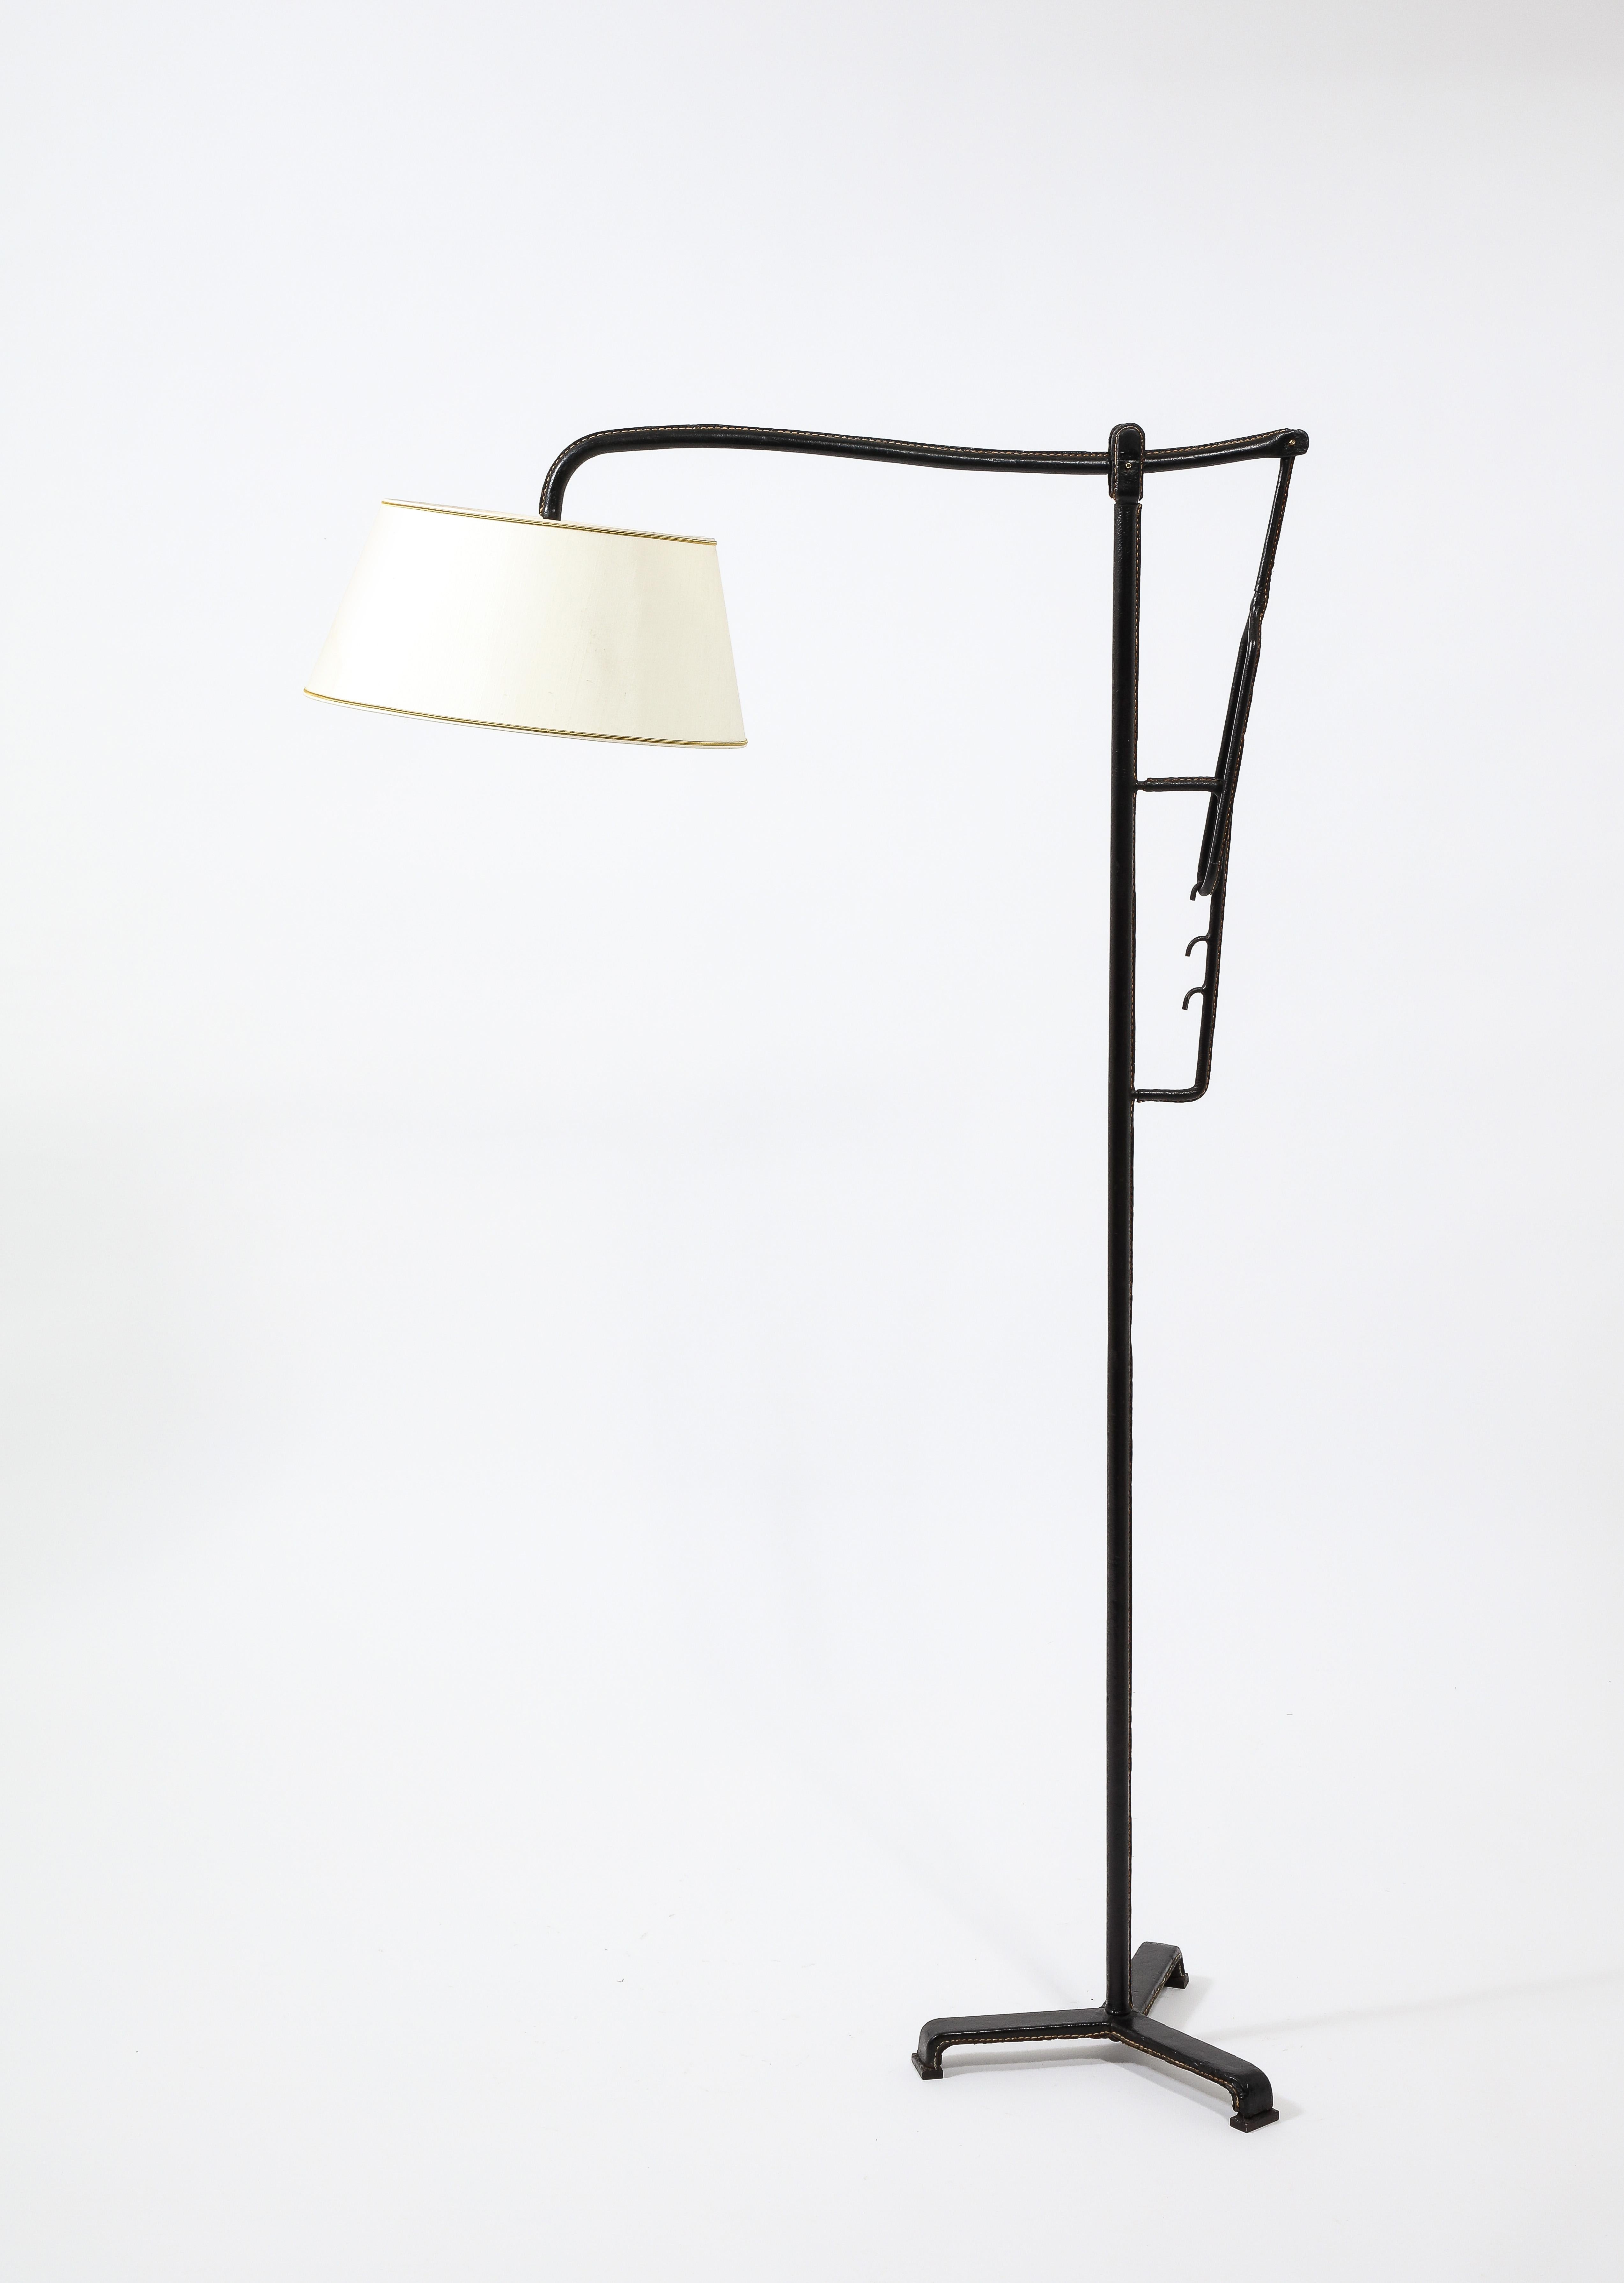 Jacques Adnet Black Leather Potence Floor Lamp, France 1940's For Sale 11